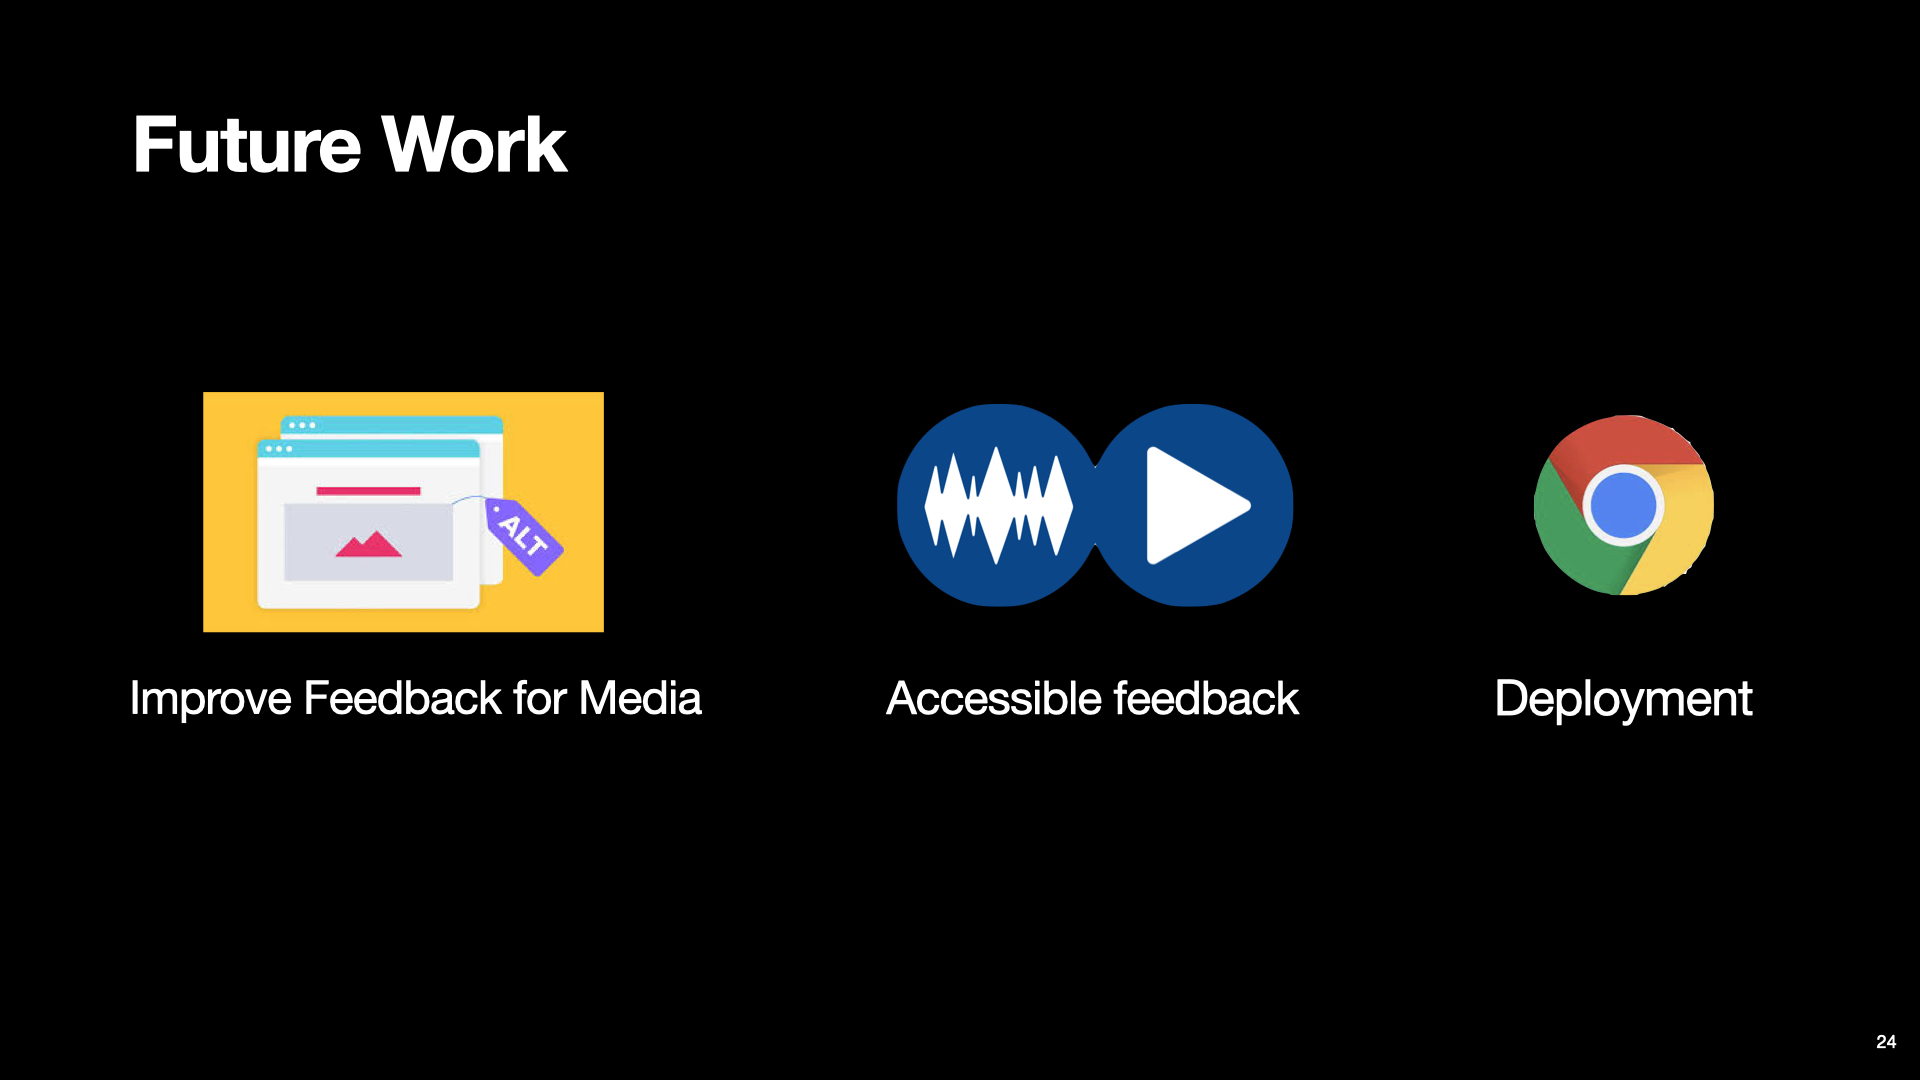 The title “Future Work” is placed at the top left of the slide. Three items placed side-by-side below the title. The first item contains text “Improve Feedback for Media” and an image depicting a couple of web pages with an alternative tag placed on top of the text. The second item contains text “Accessible feedback” with a waveform icon and play icon placed on top of the text. The last item contains text “Deployment” with a Chrome logo placed on top of the text.